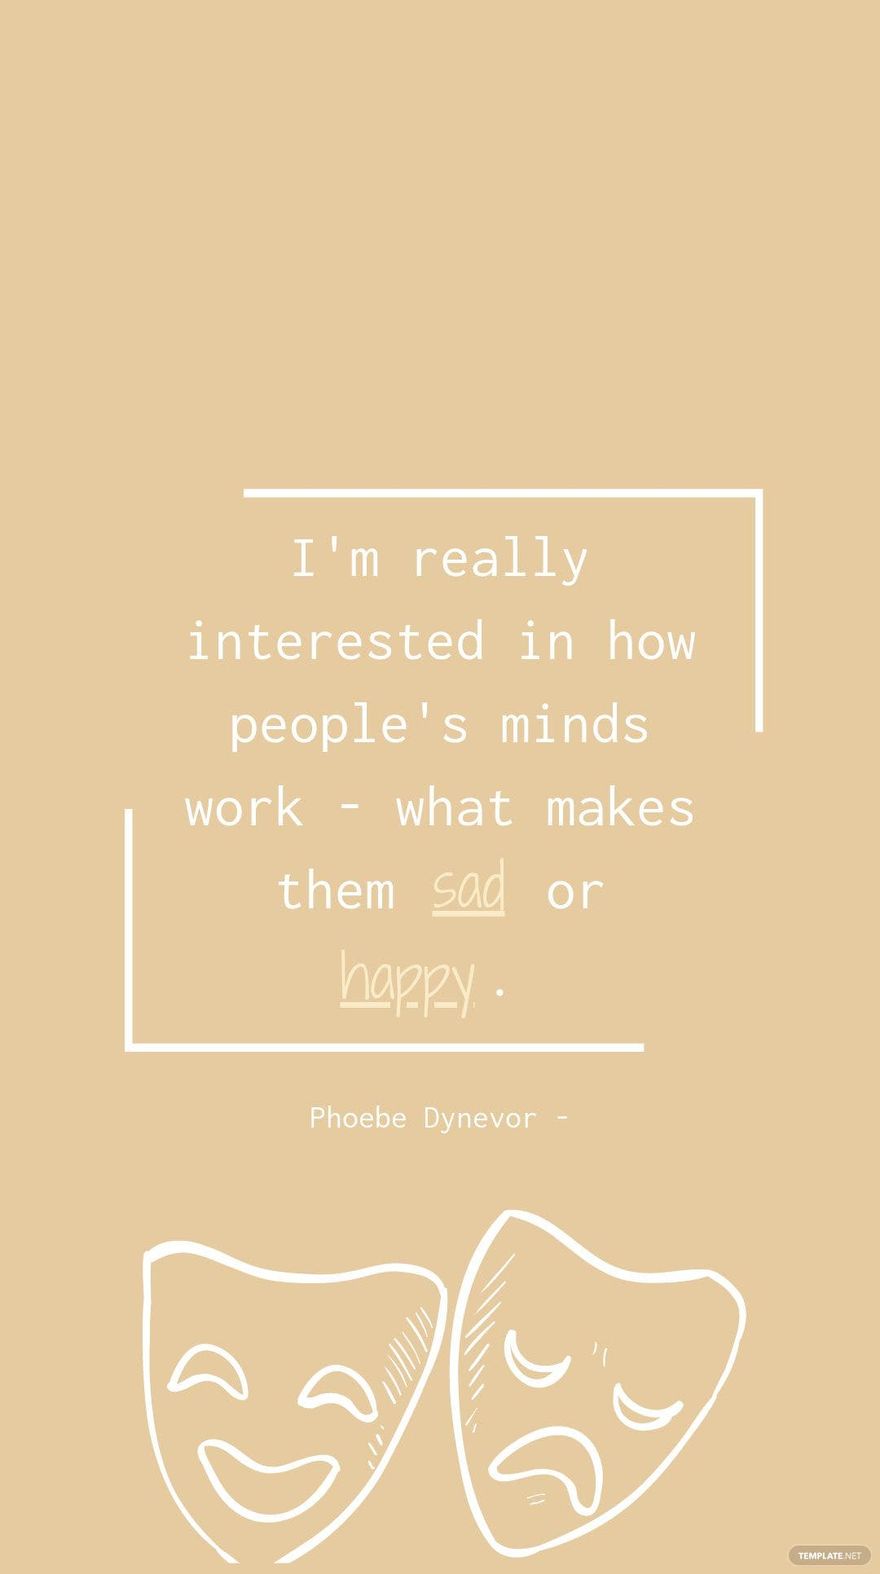 Phoebe Dynevor - I'm really interested in how people's minds work - what makes them sad or happy.